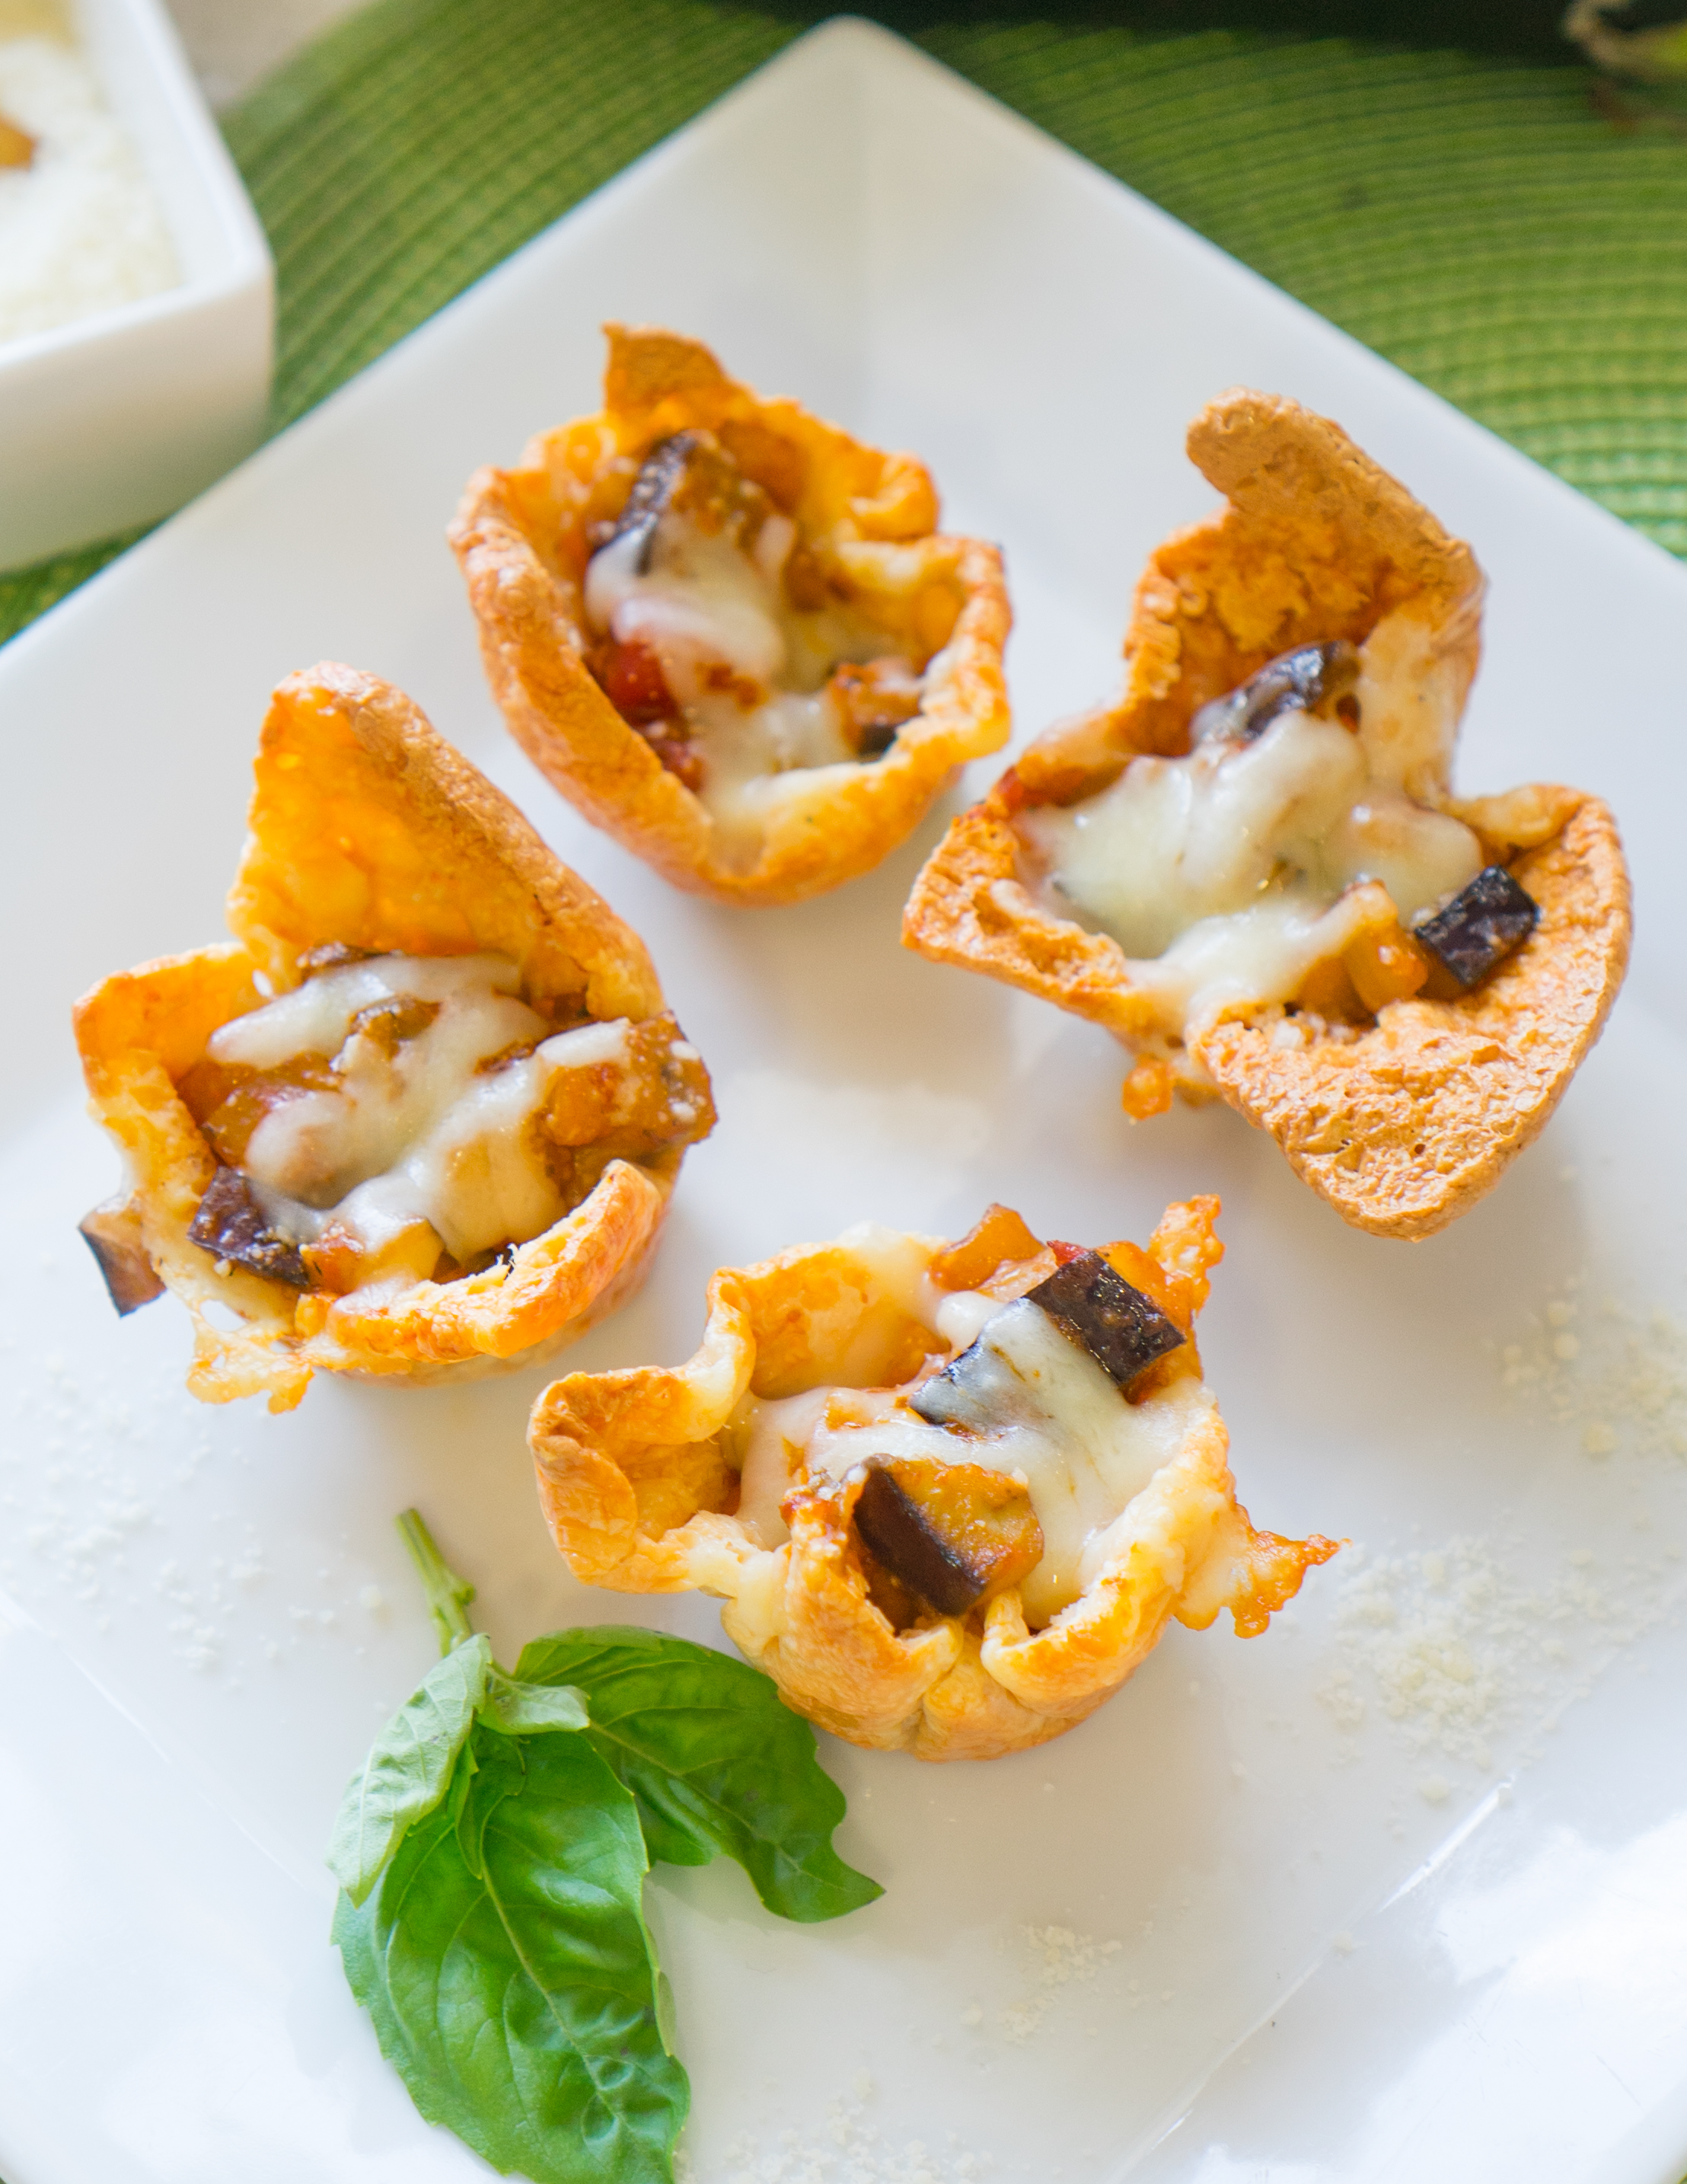 crispy cheese cups with chunks of eggplant inside, topped with melted cheese, on white cutting board